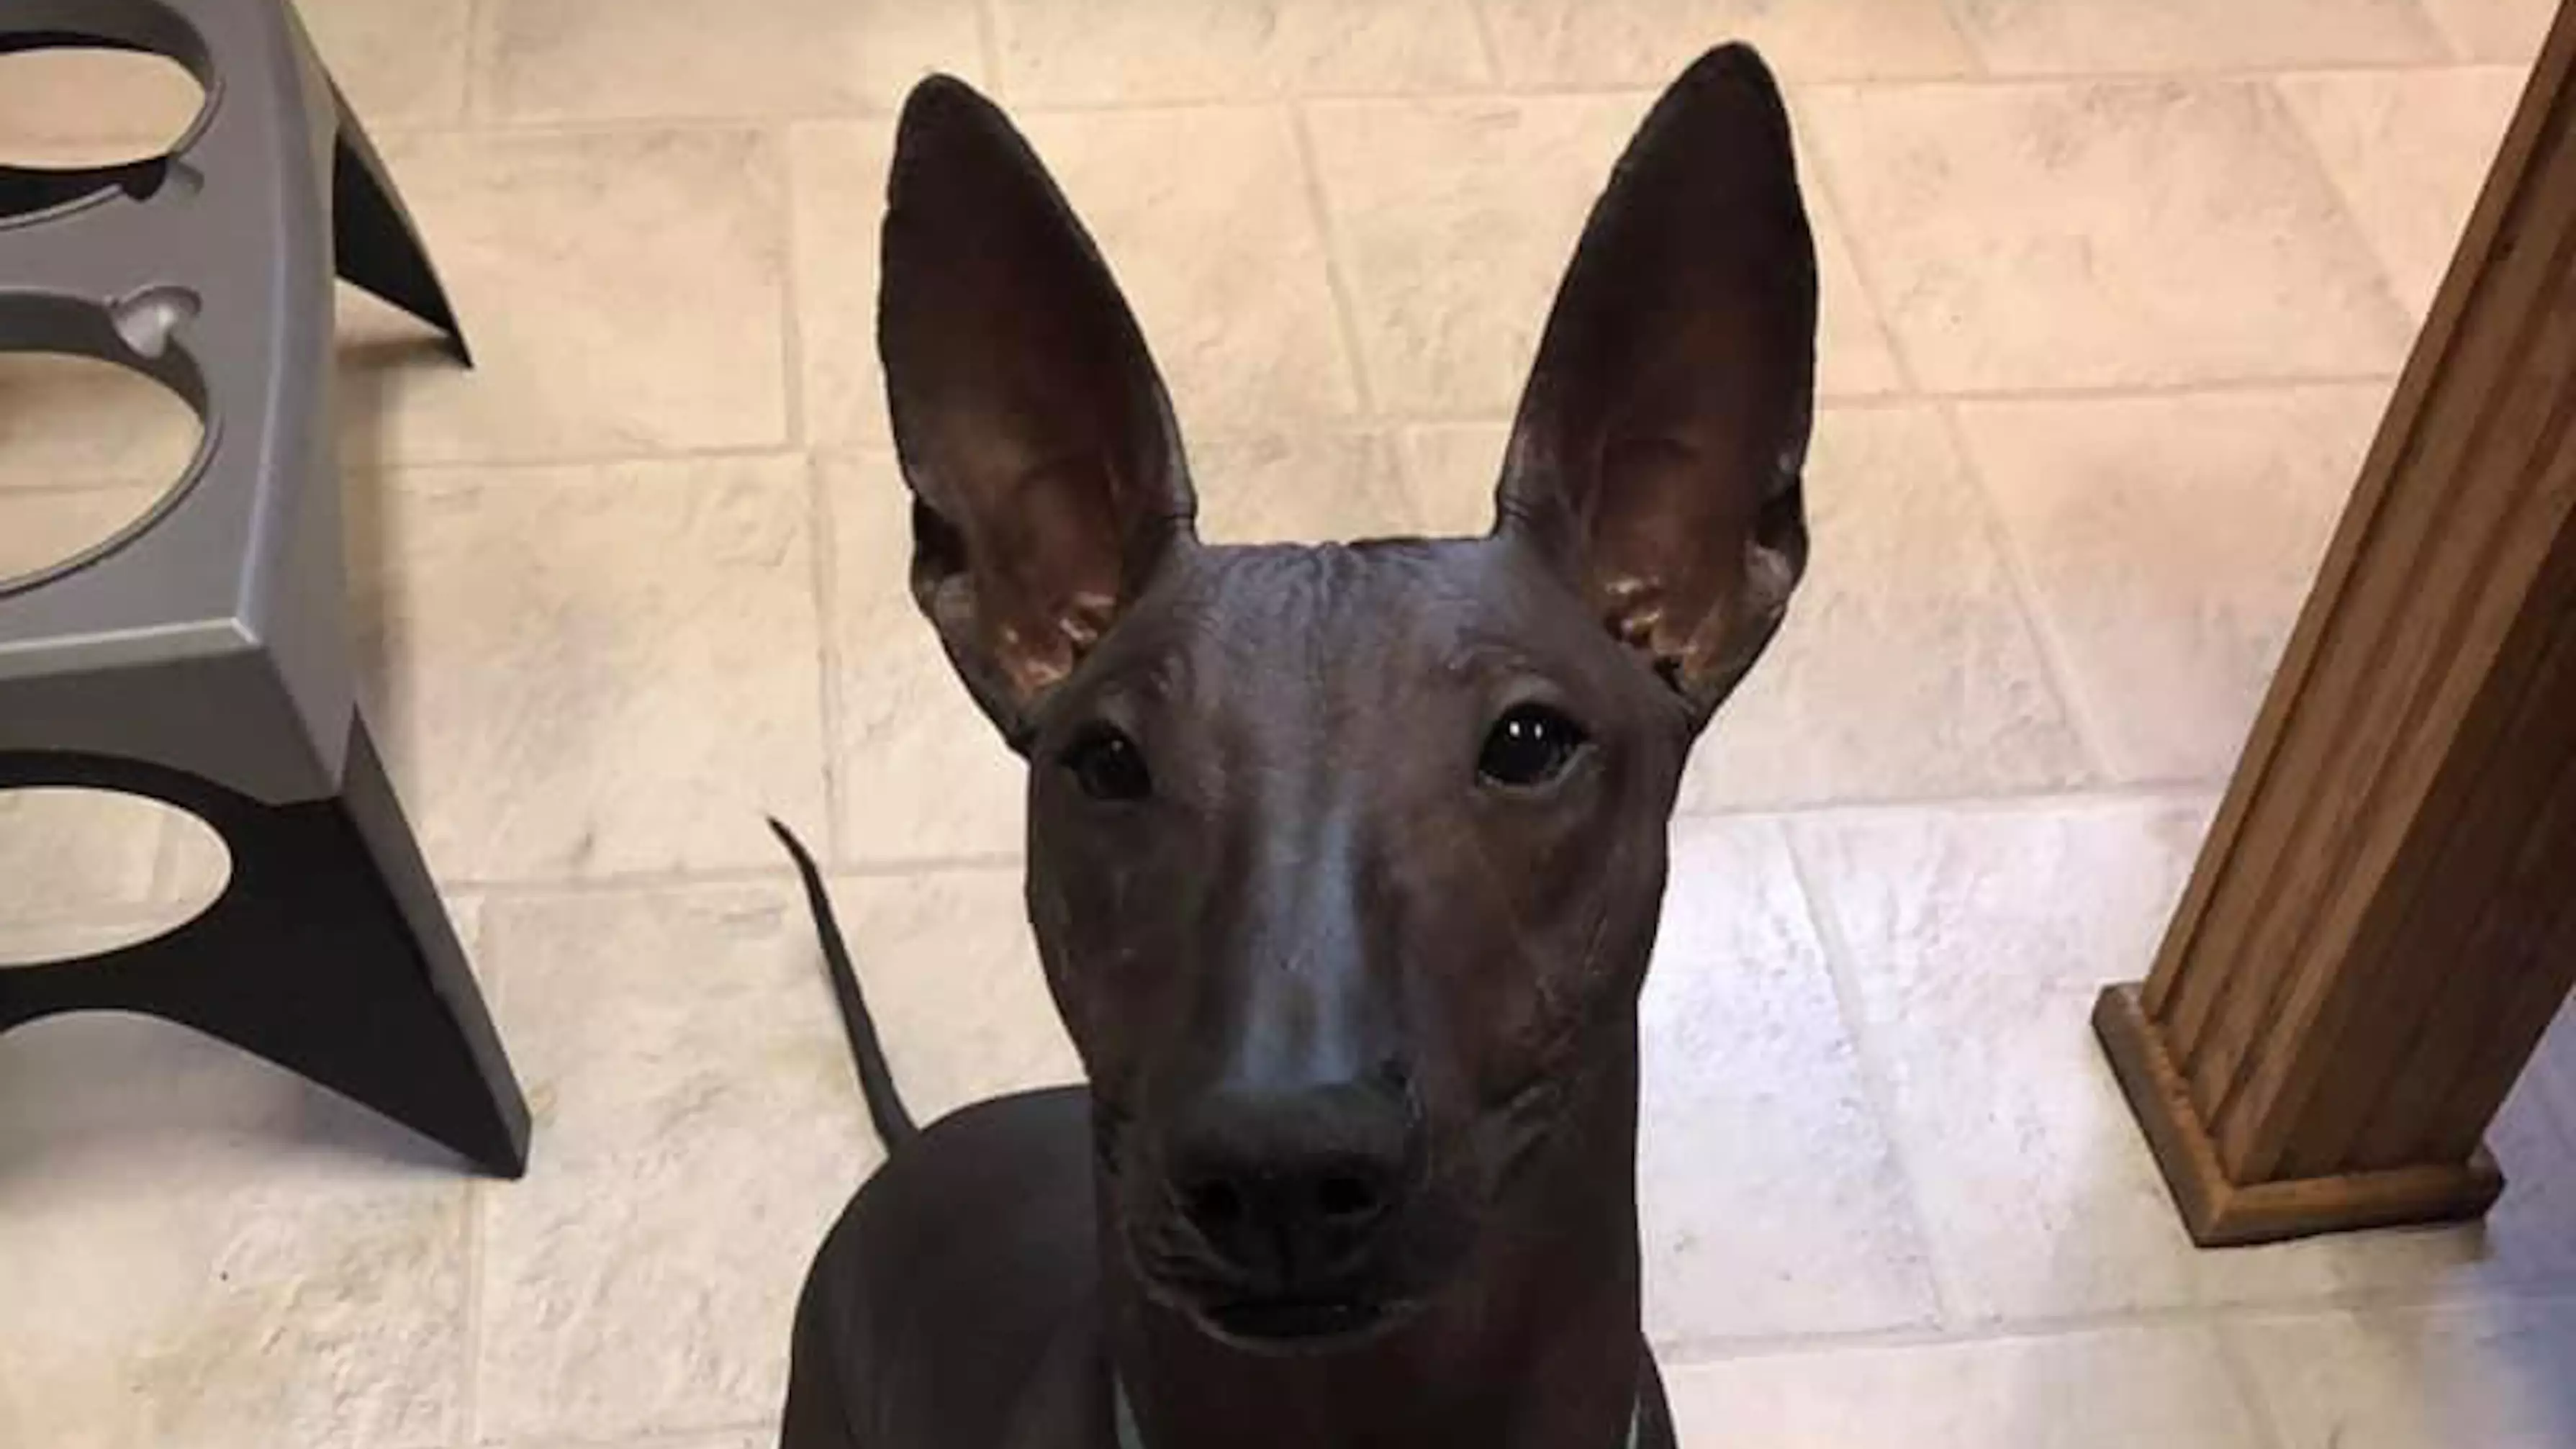 Woman Pays £2000 For Rare Hairless Dog That 'Looks Like Statue'